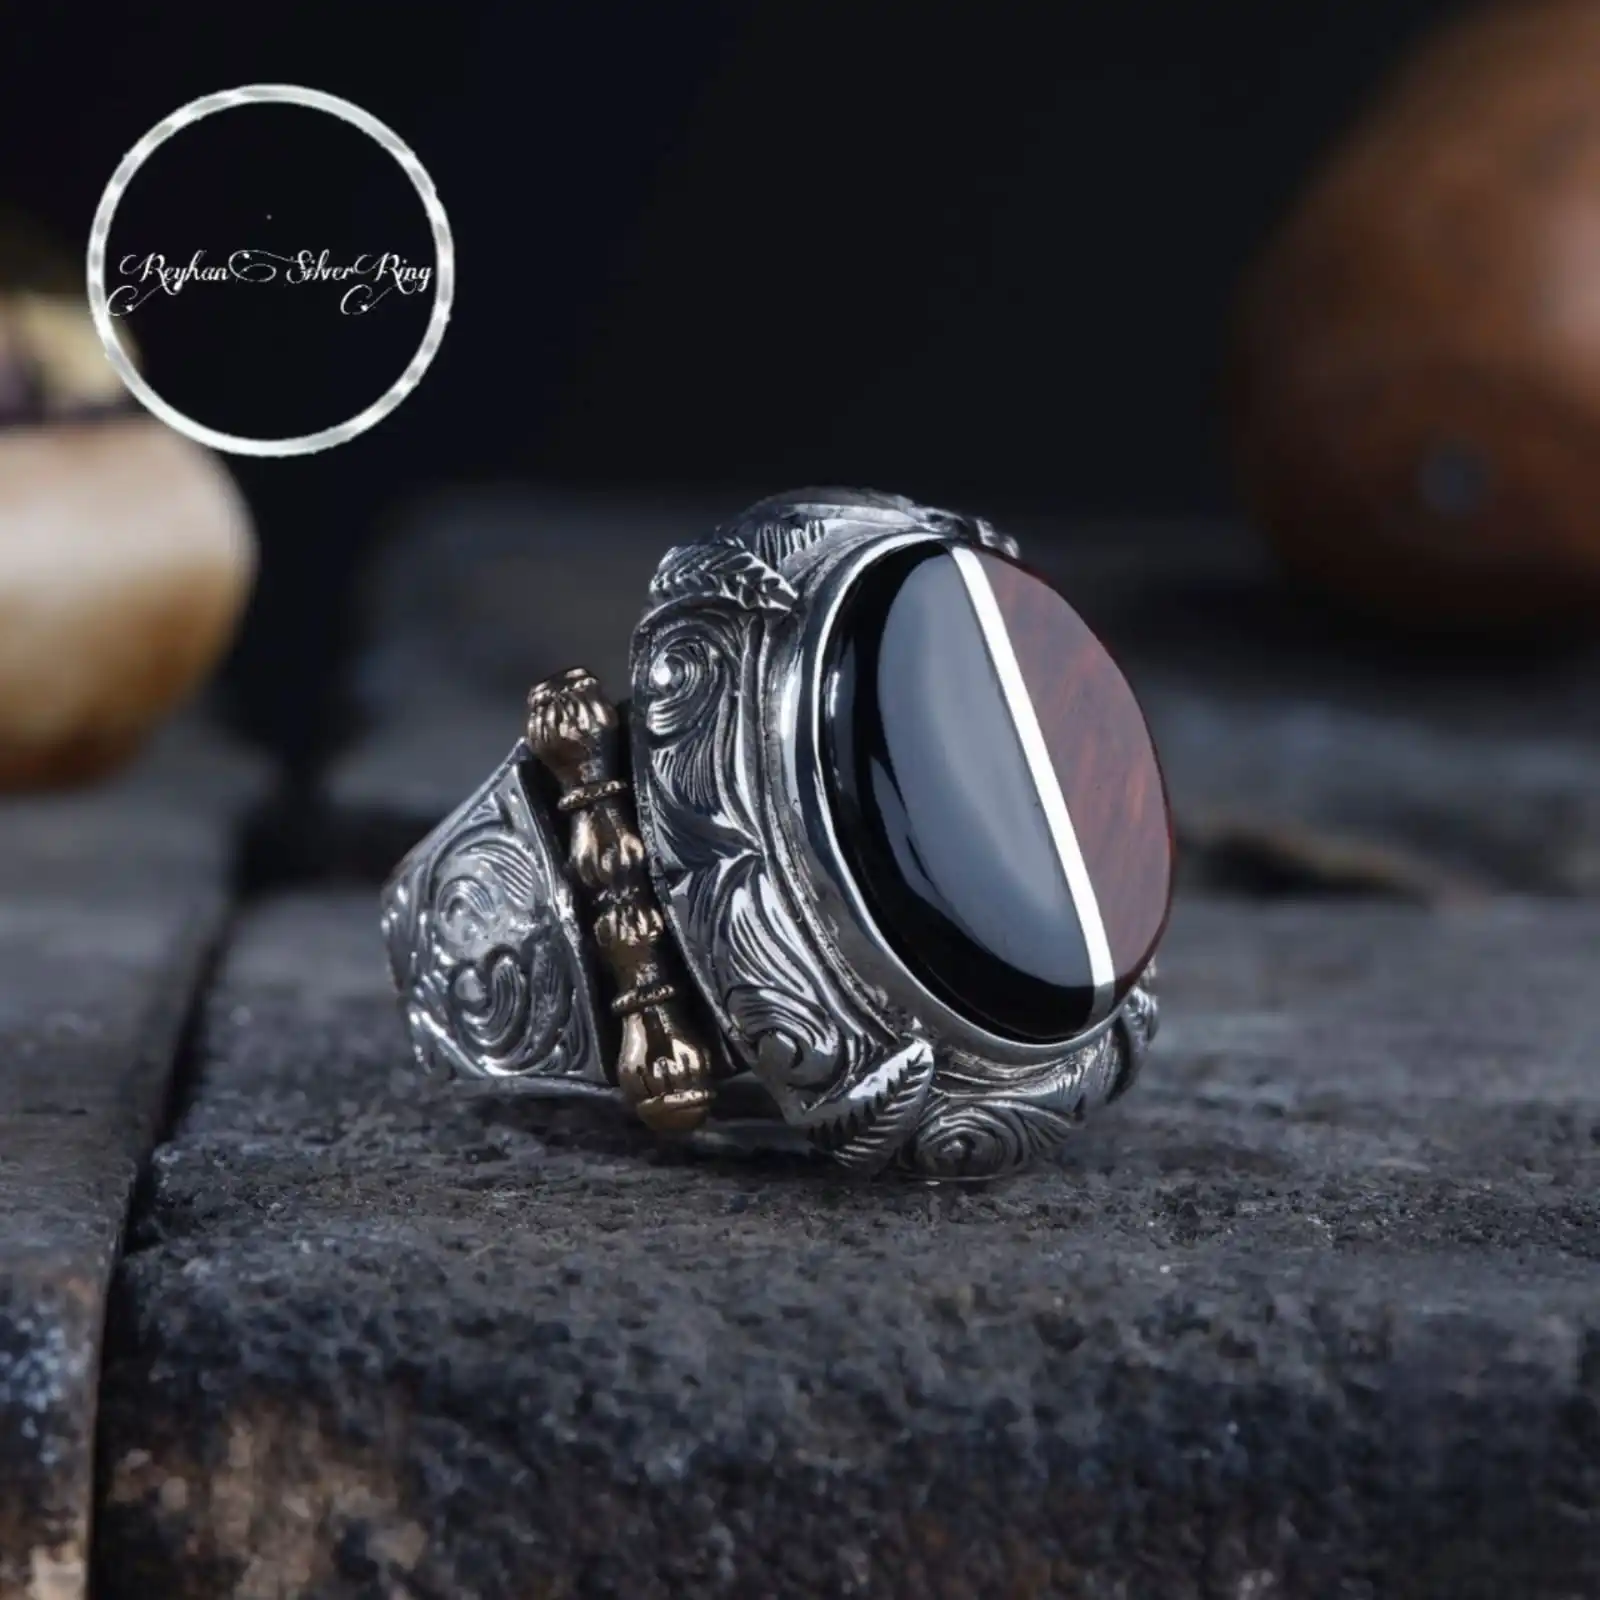 （order 300 pieces only）design any size plastic or metal frame for stone lcd display module spread Handcrafted Silver Inlaid Men's Ring with Coca and Oltu Stone - Unique Splitting and Pencil Engraved Design